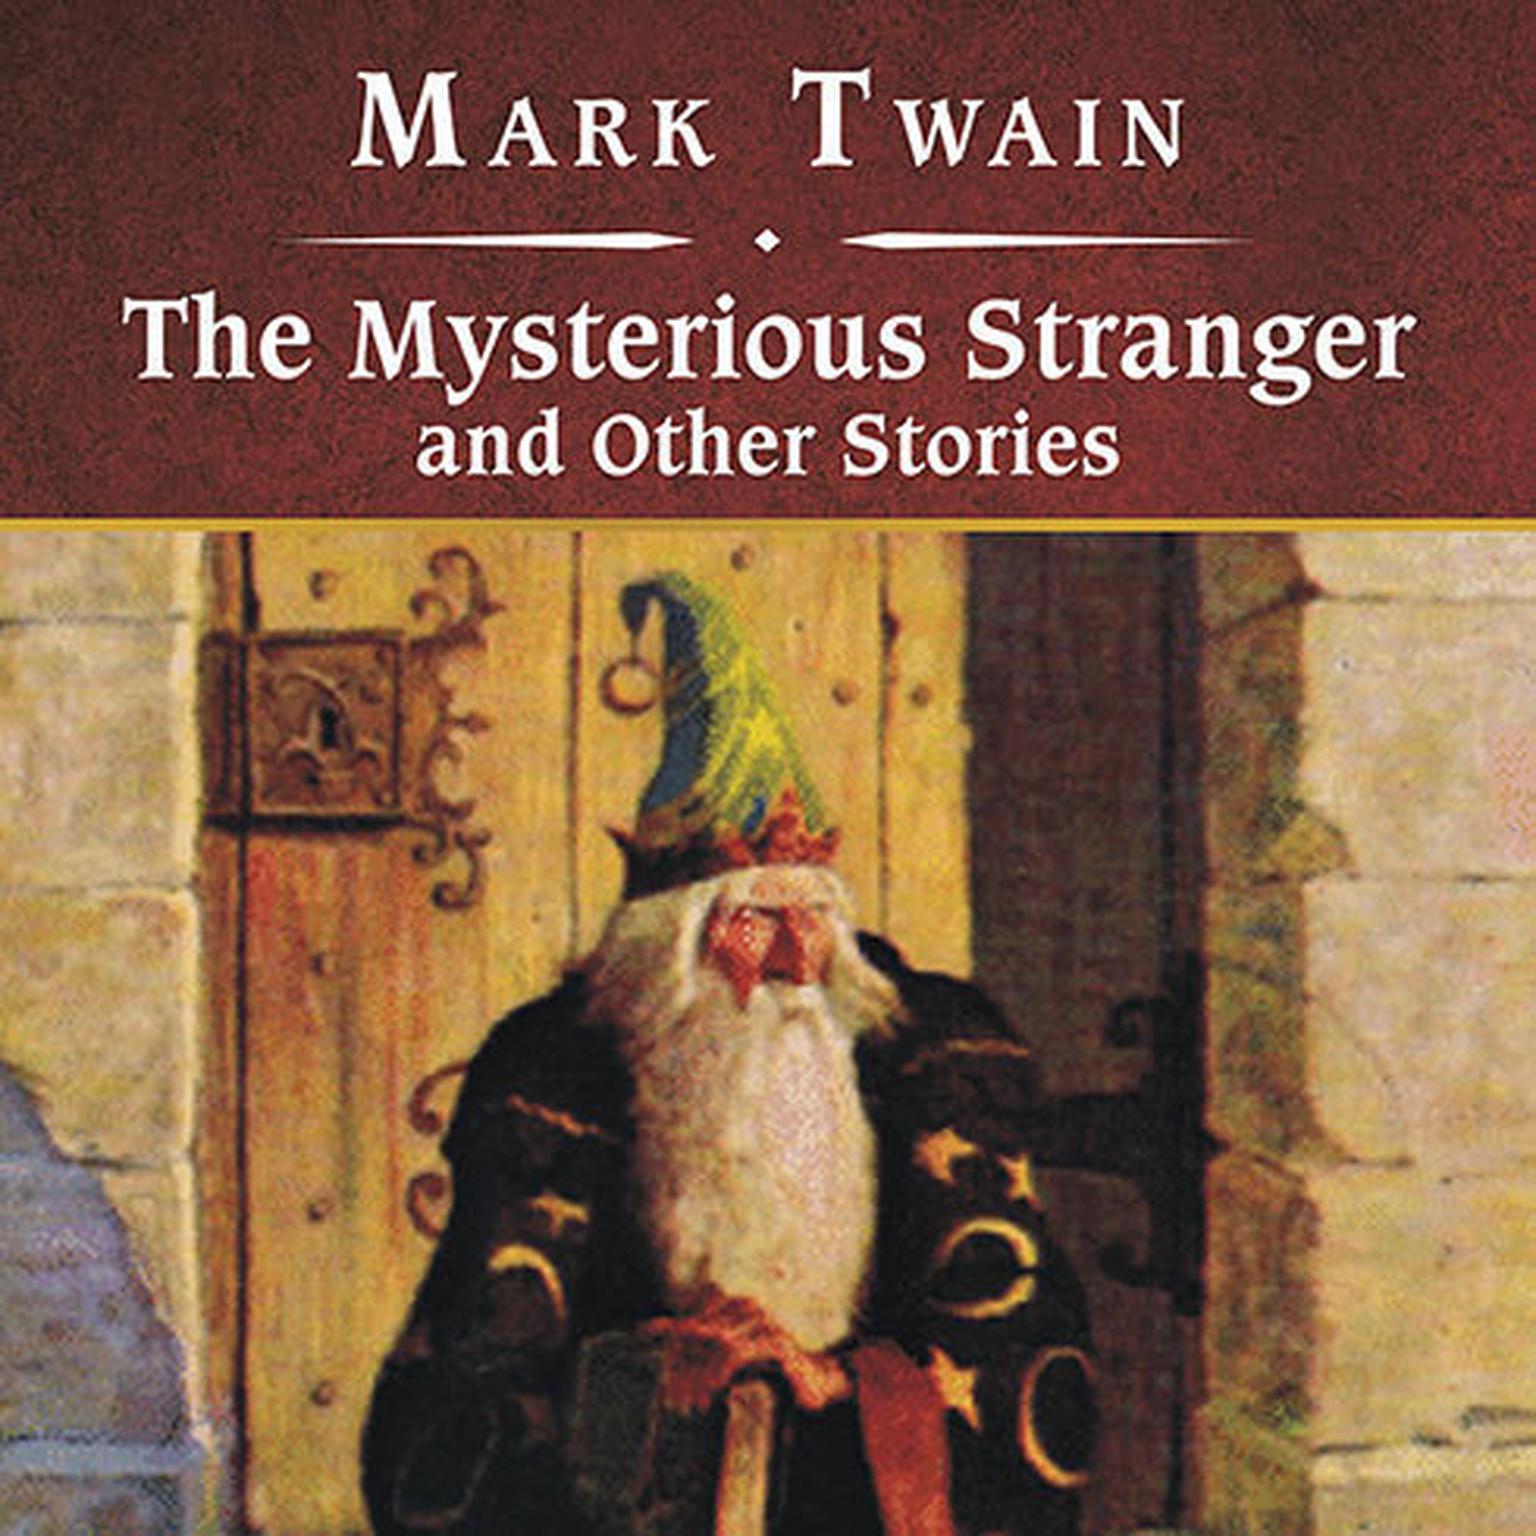 The Mysterious Stranger and Other Stories, with eBook Audiobook, by Mark Twain